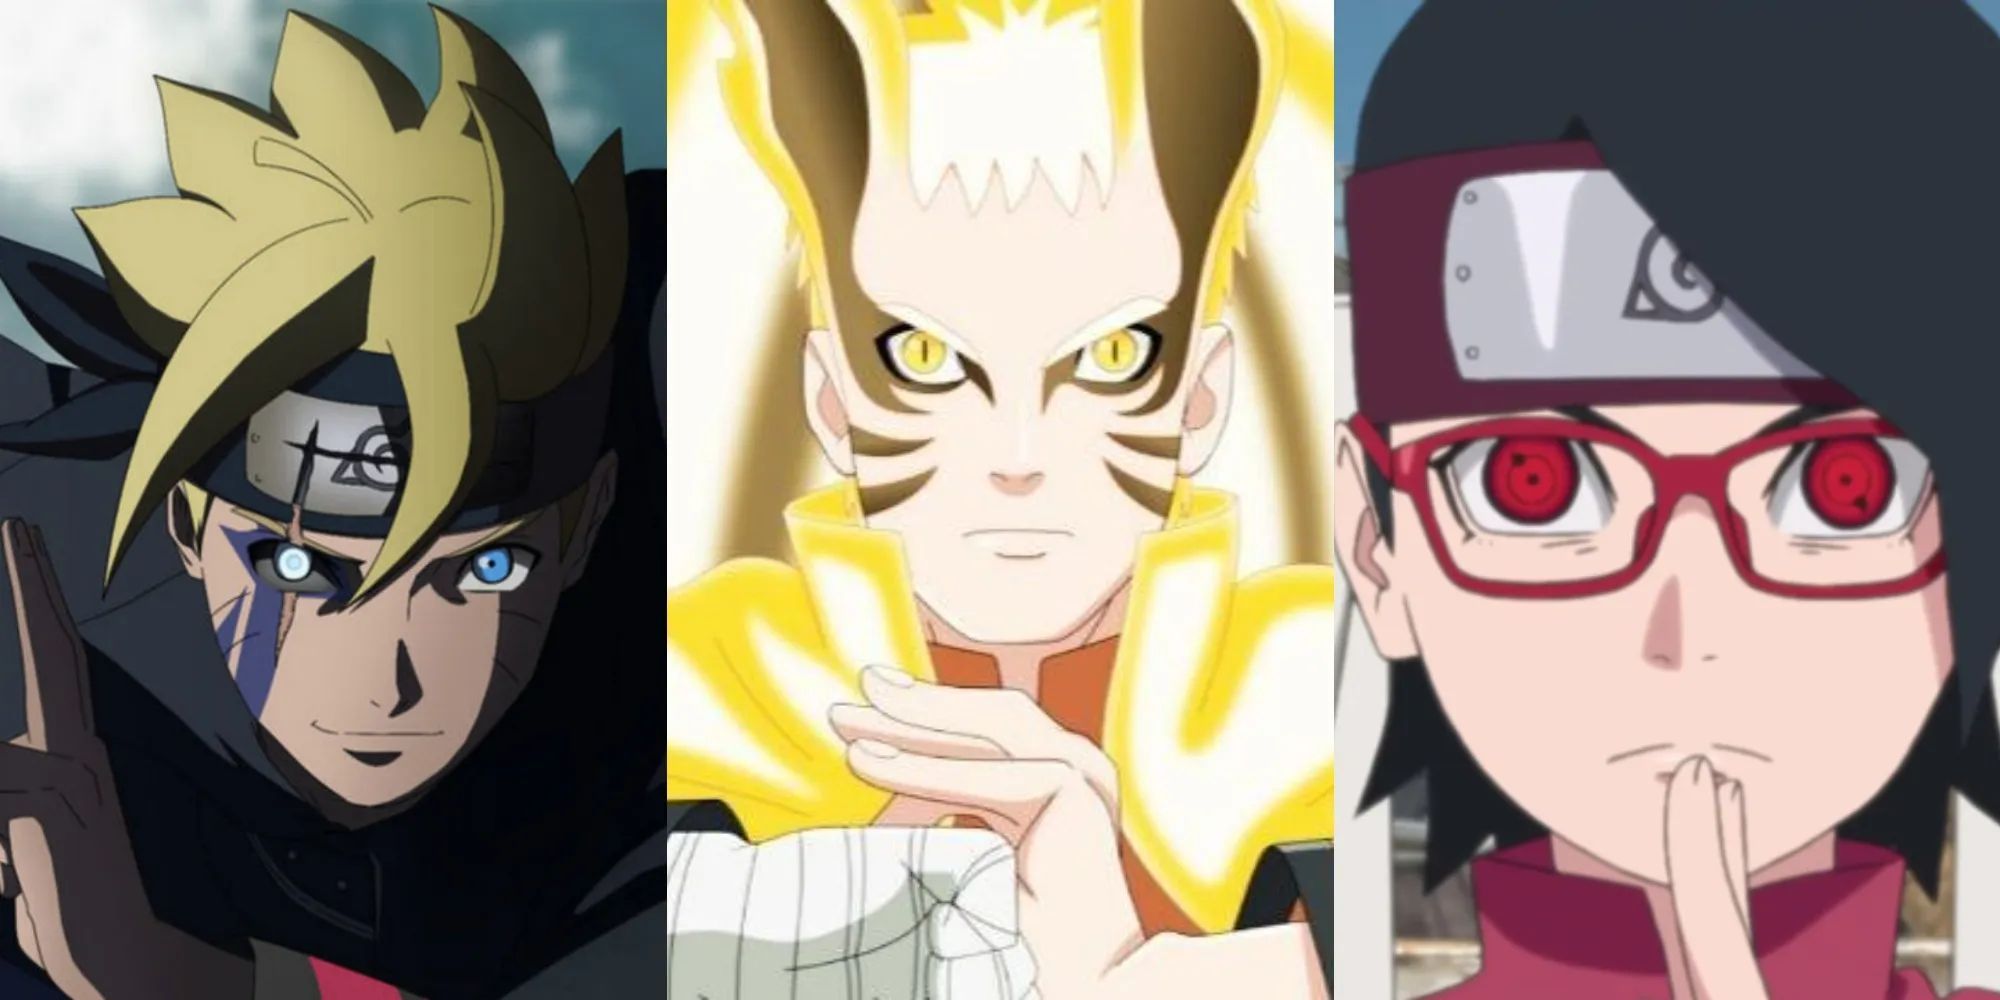 Boruto Naruto Next Generations Anime Enters New Arc In July